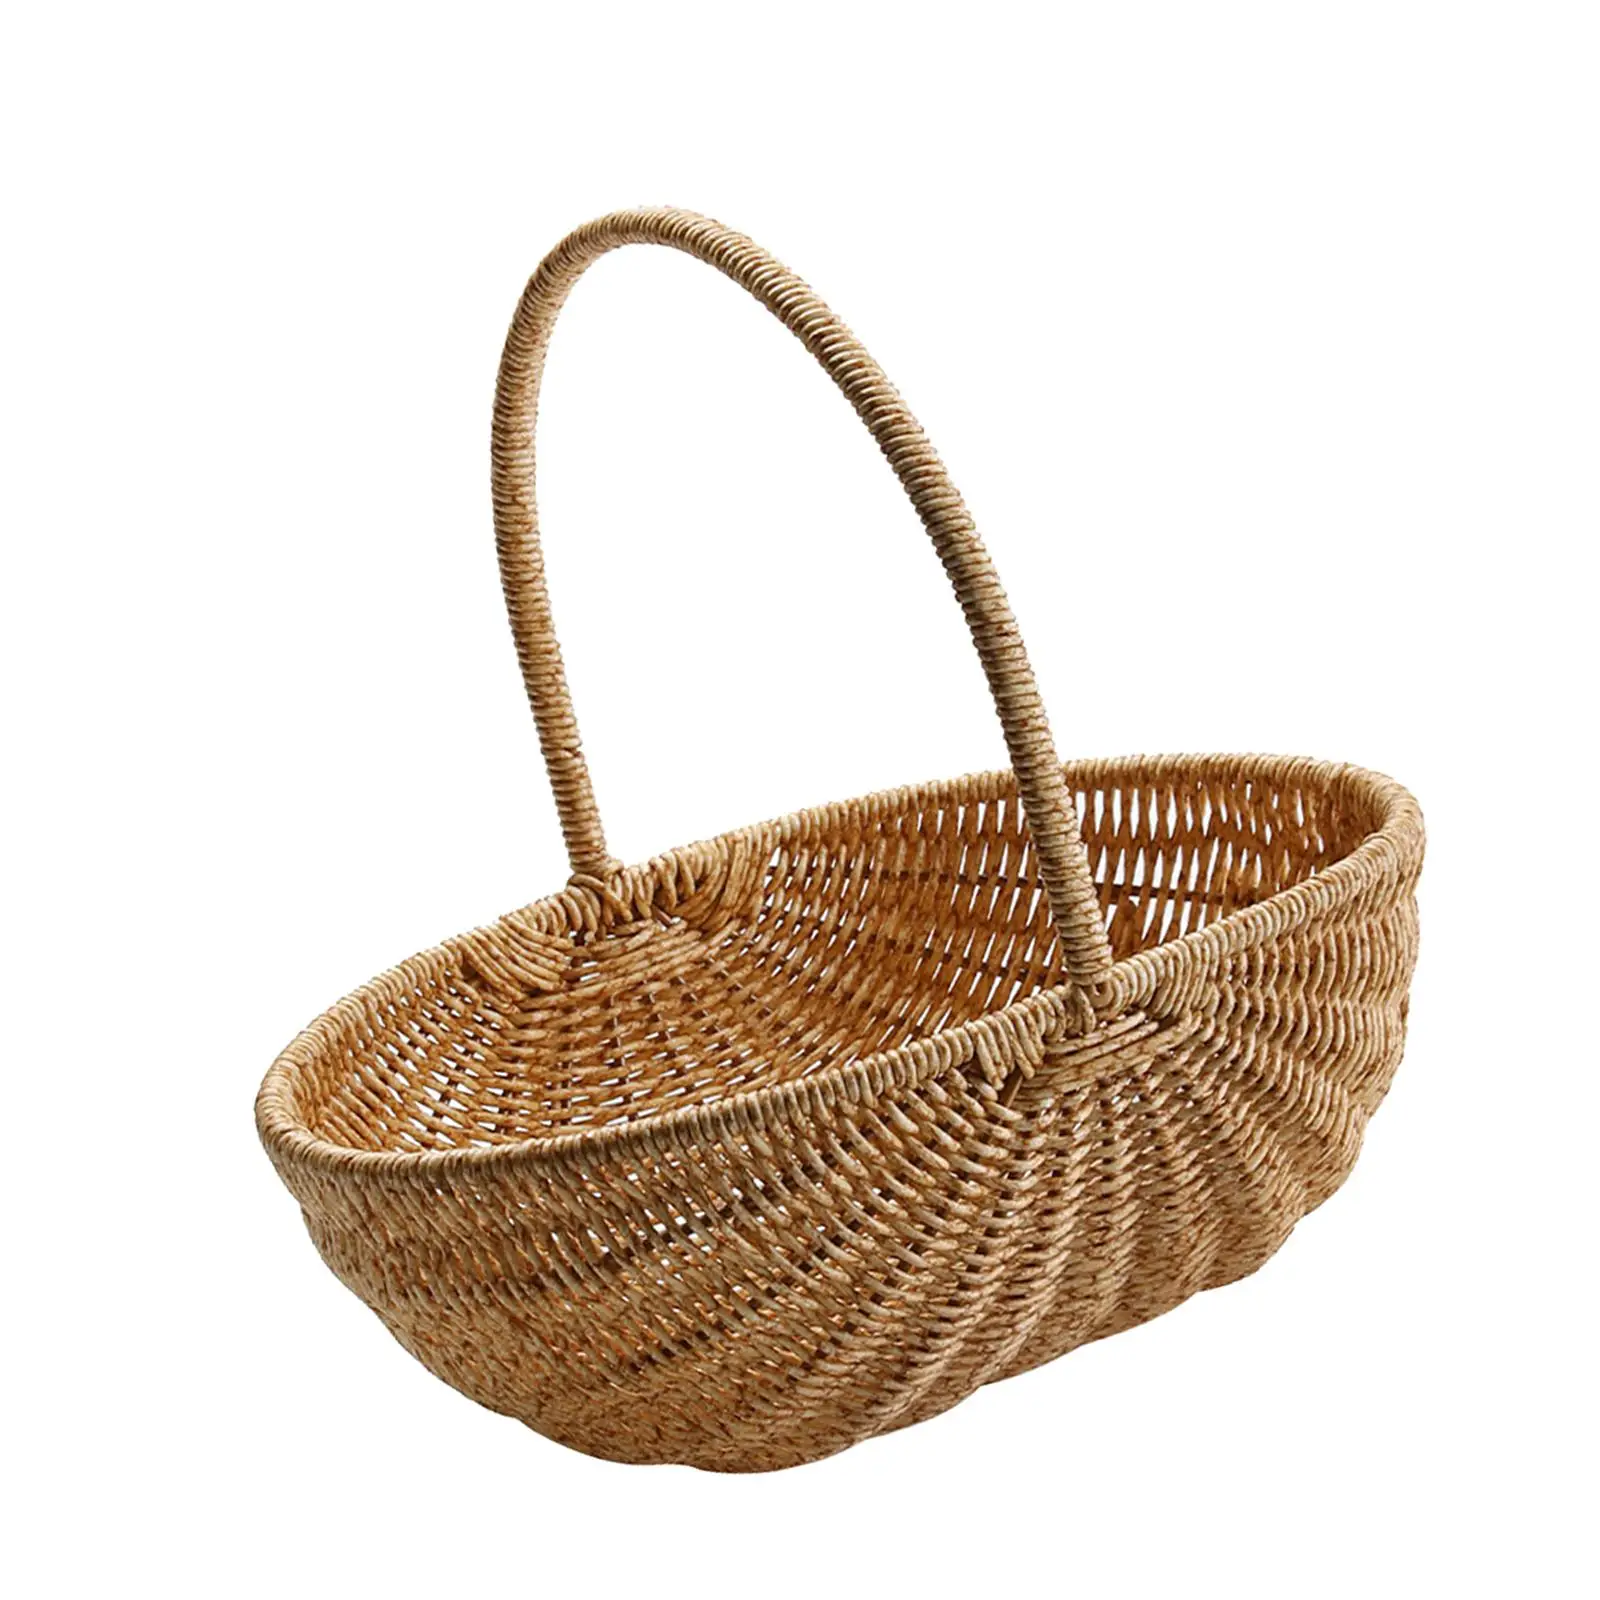 Multifunctional Woven Basket Storage Breathable Decoration with Handle Organizer for Picnic Shopping Cabinet Bathroom Vegetables